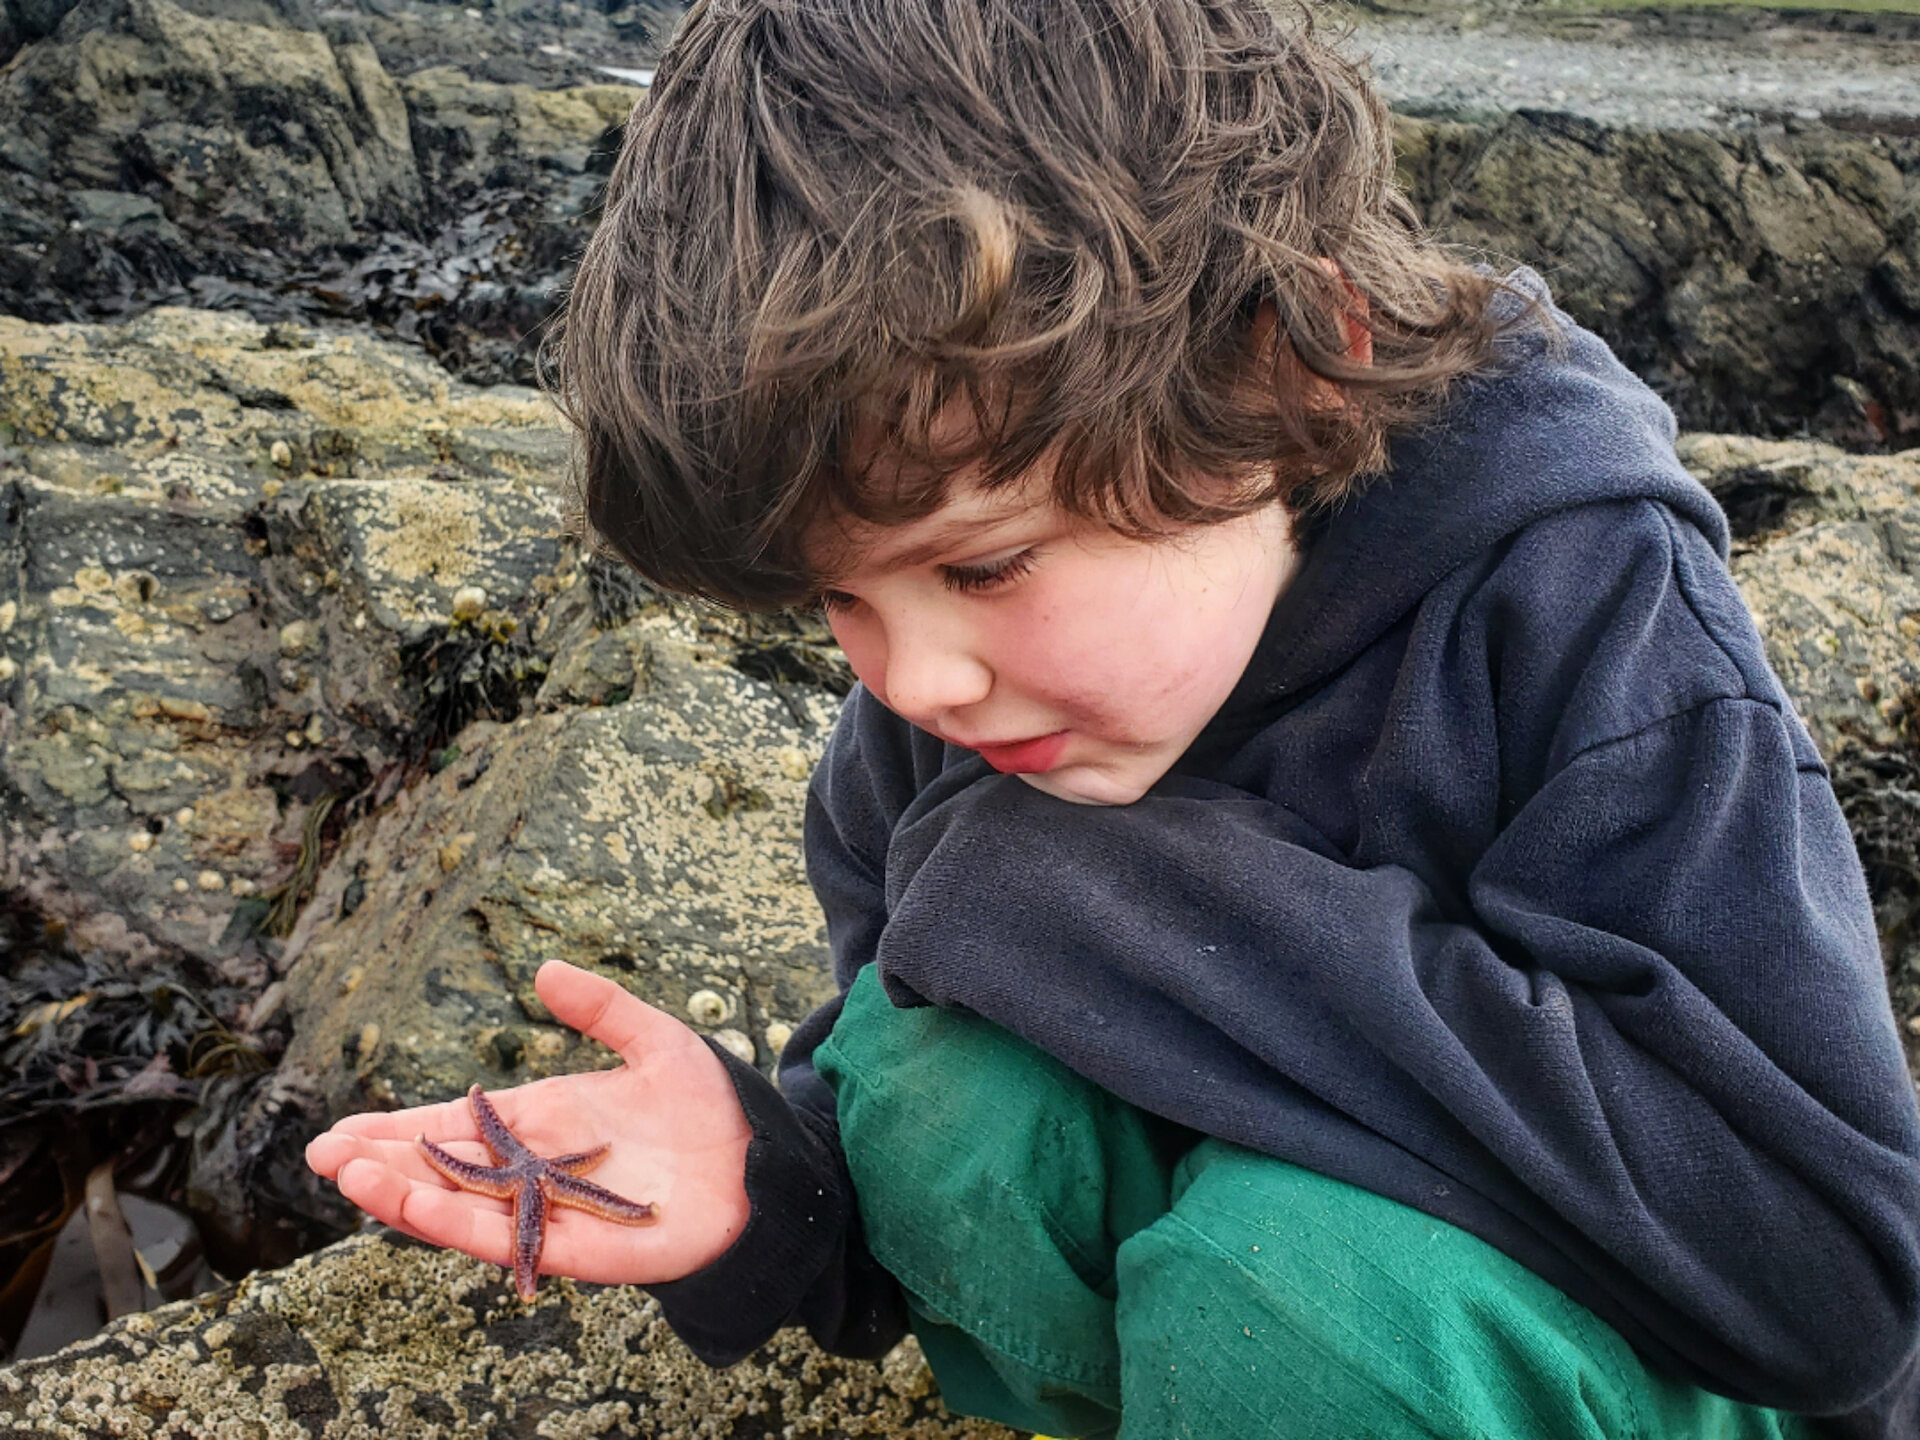 Amazed by the starfish.